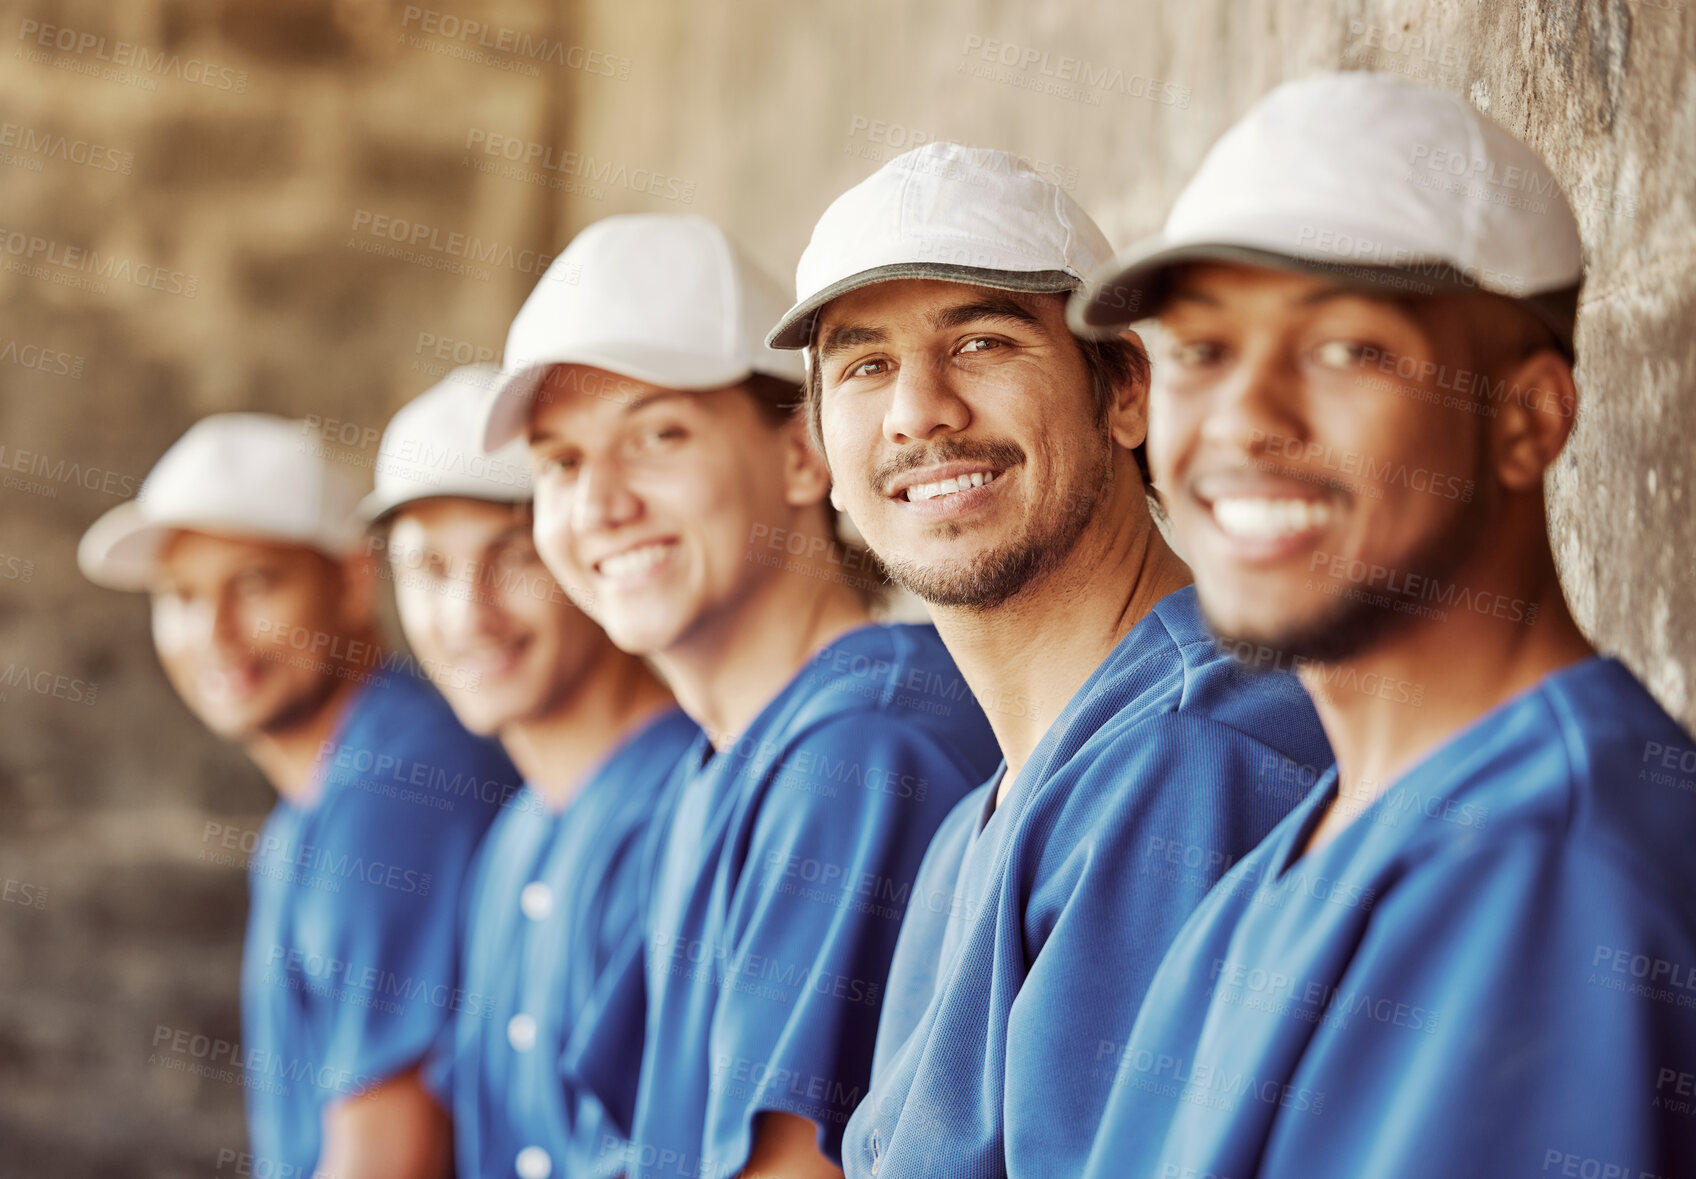 Buy stock photo Baseball, baseball team and happy portrait smile ready for training, exercise or practice. Sports, teamwork and group of baseball players standing in dugout in collaboration preparing for workout.